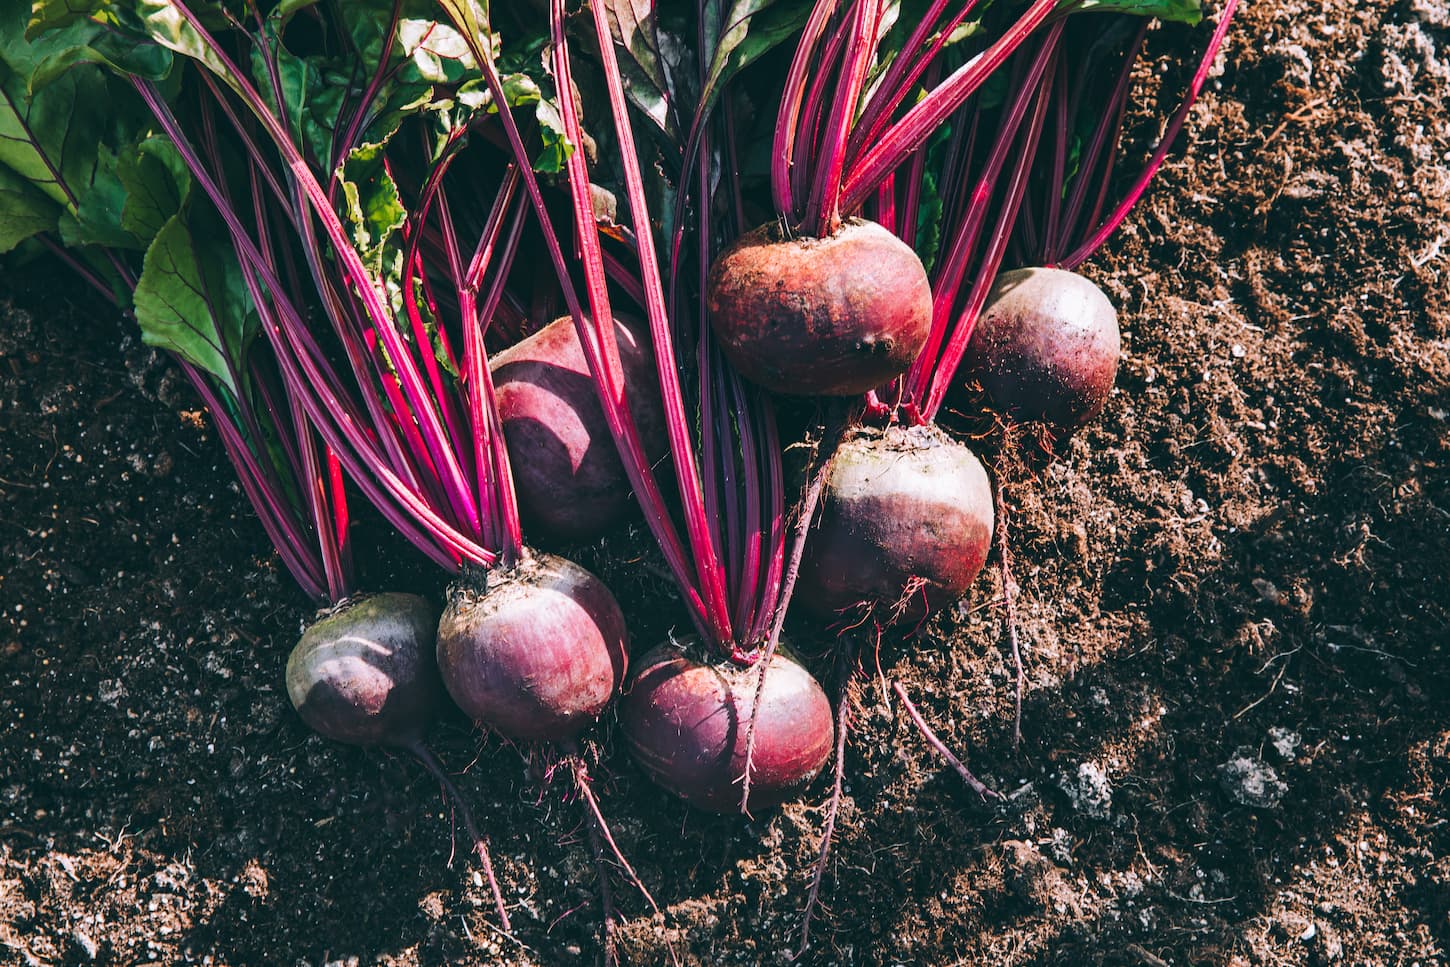 An image of newly harvested fresh organic beet on the ground.